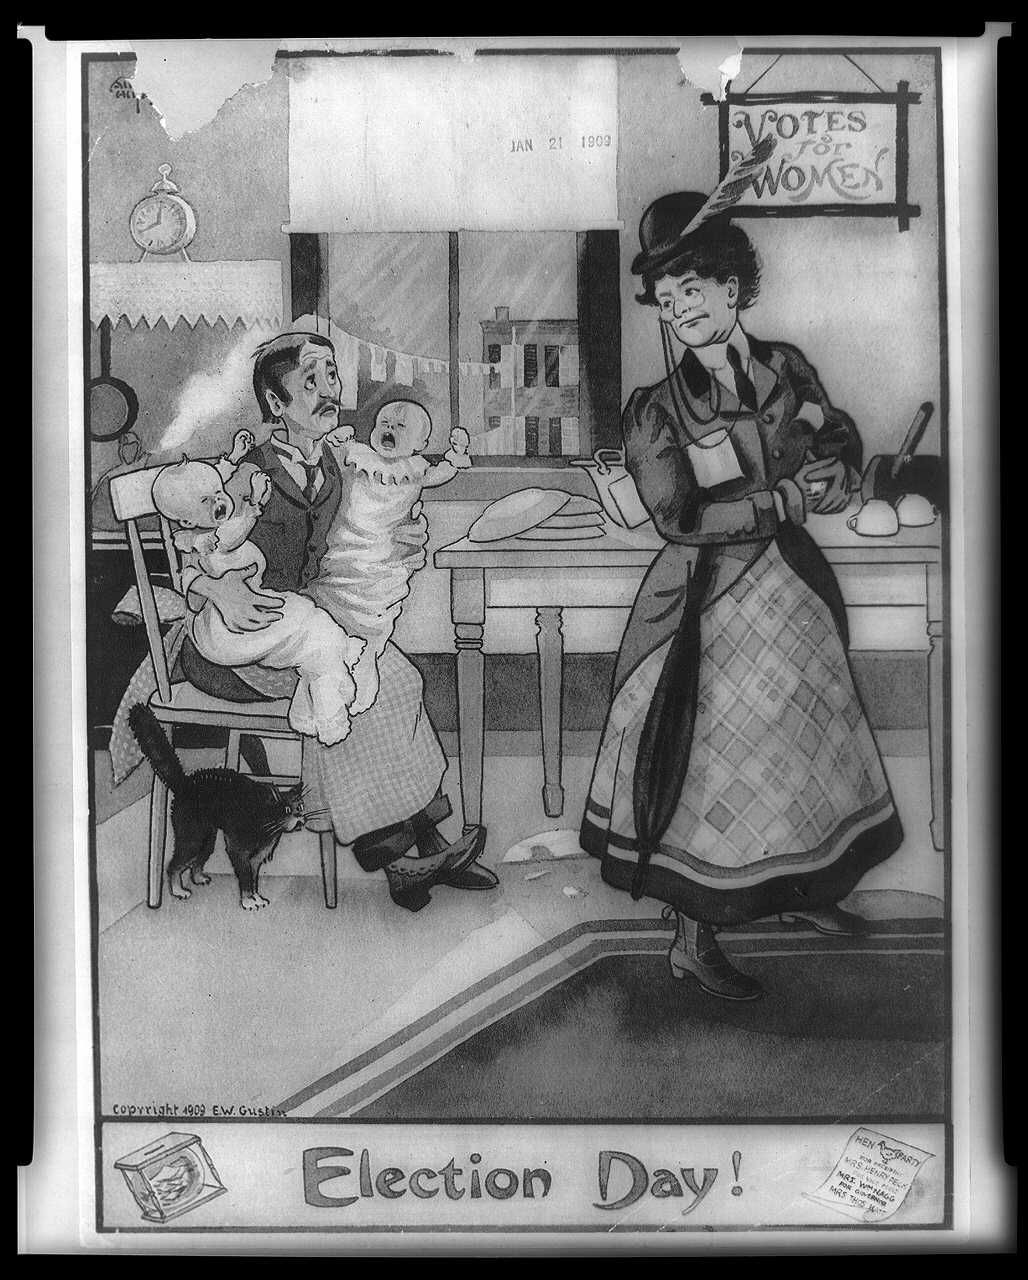 Poster with caption "election day!" as a woman leaves the house with her husband holding crying babies